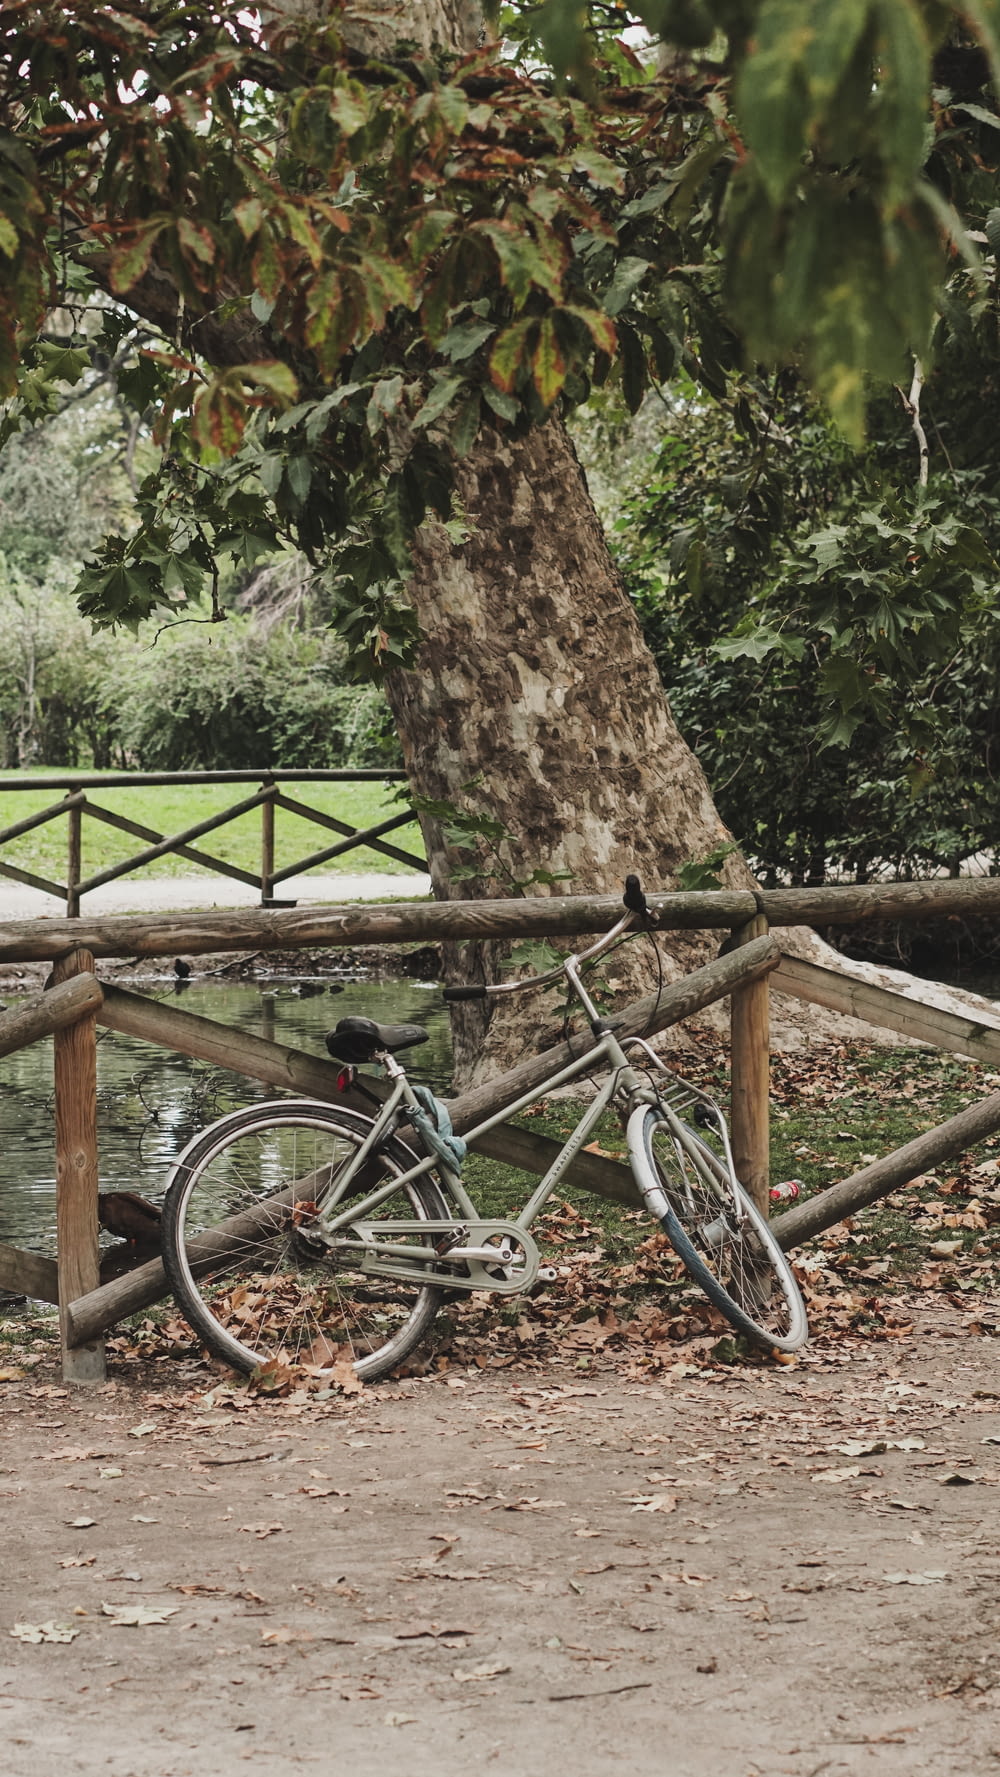 a bike leaning against a wooden fence in a park